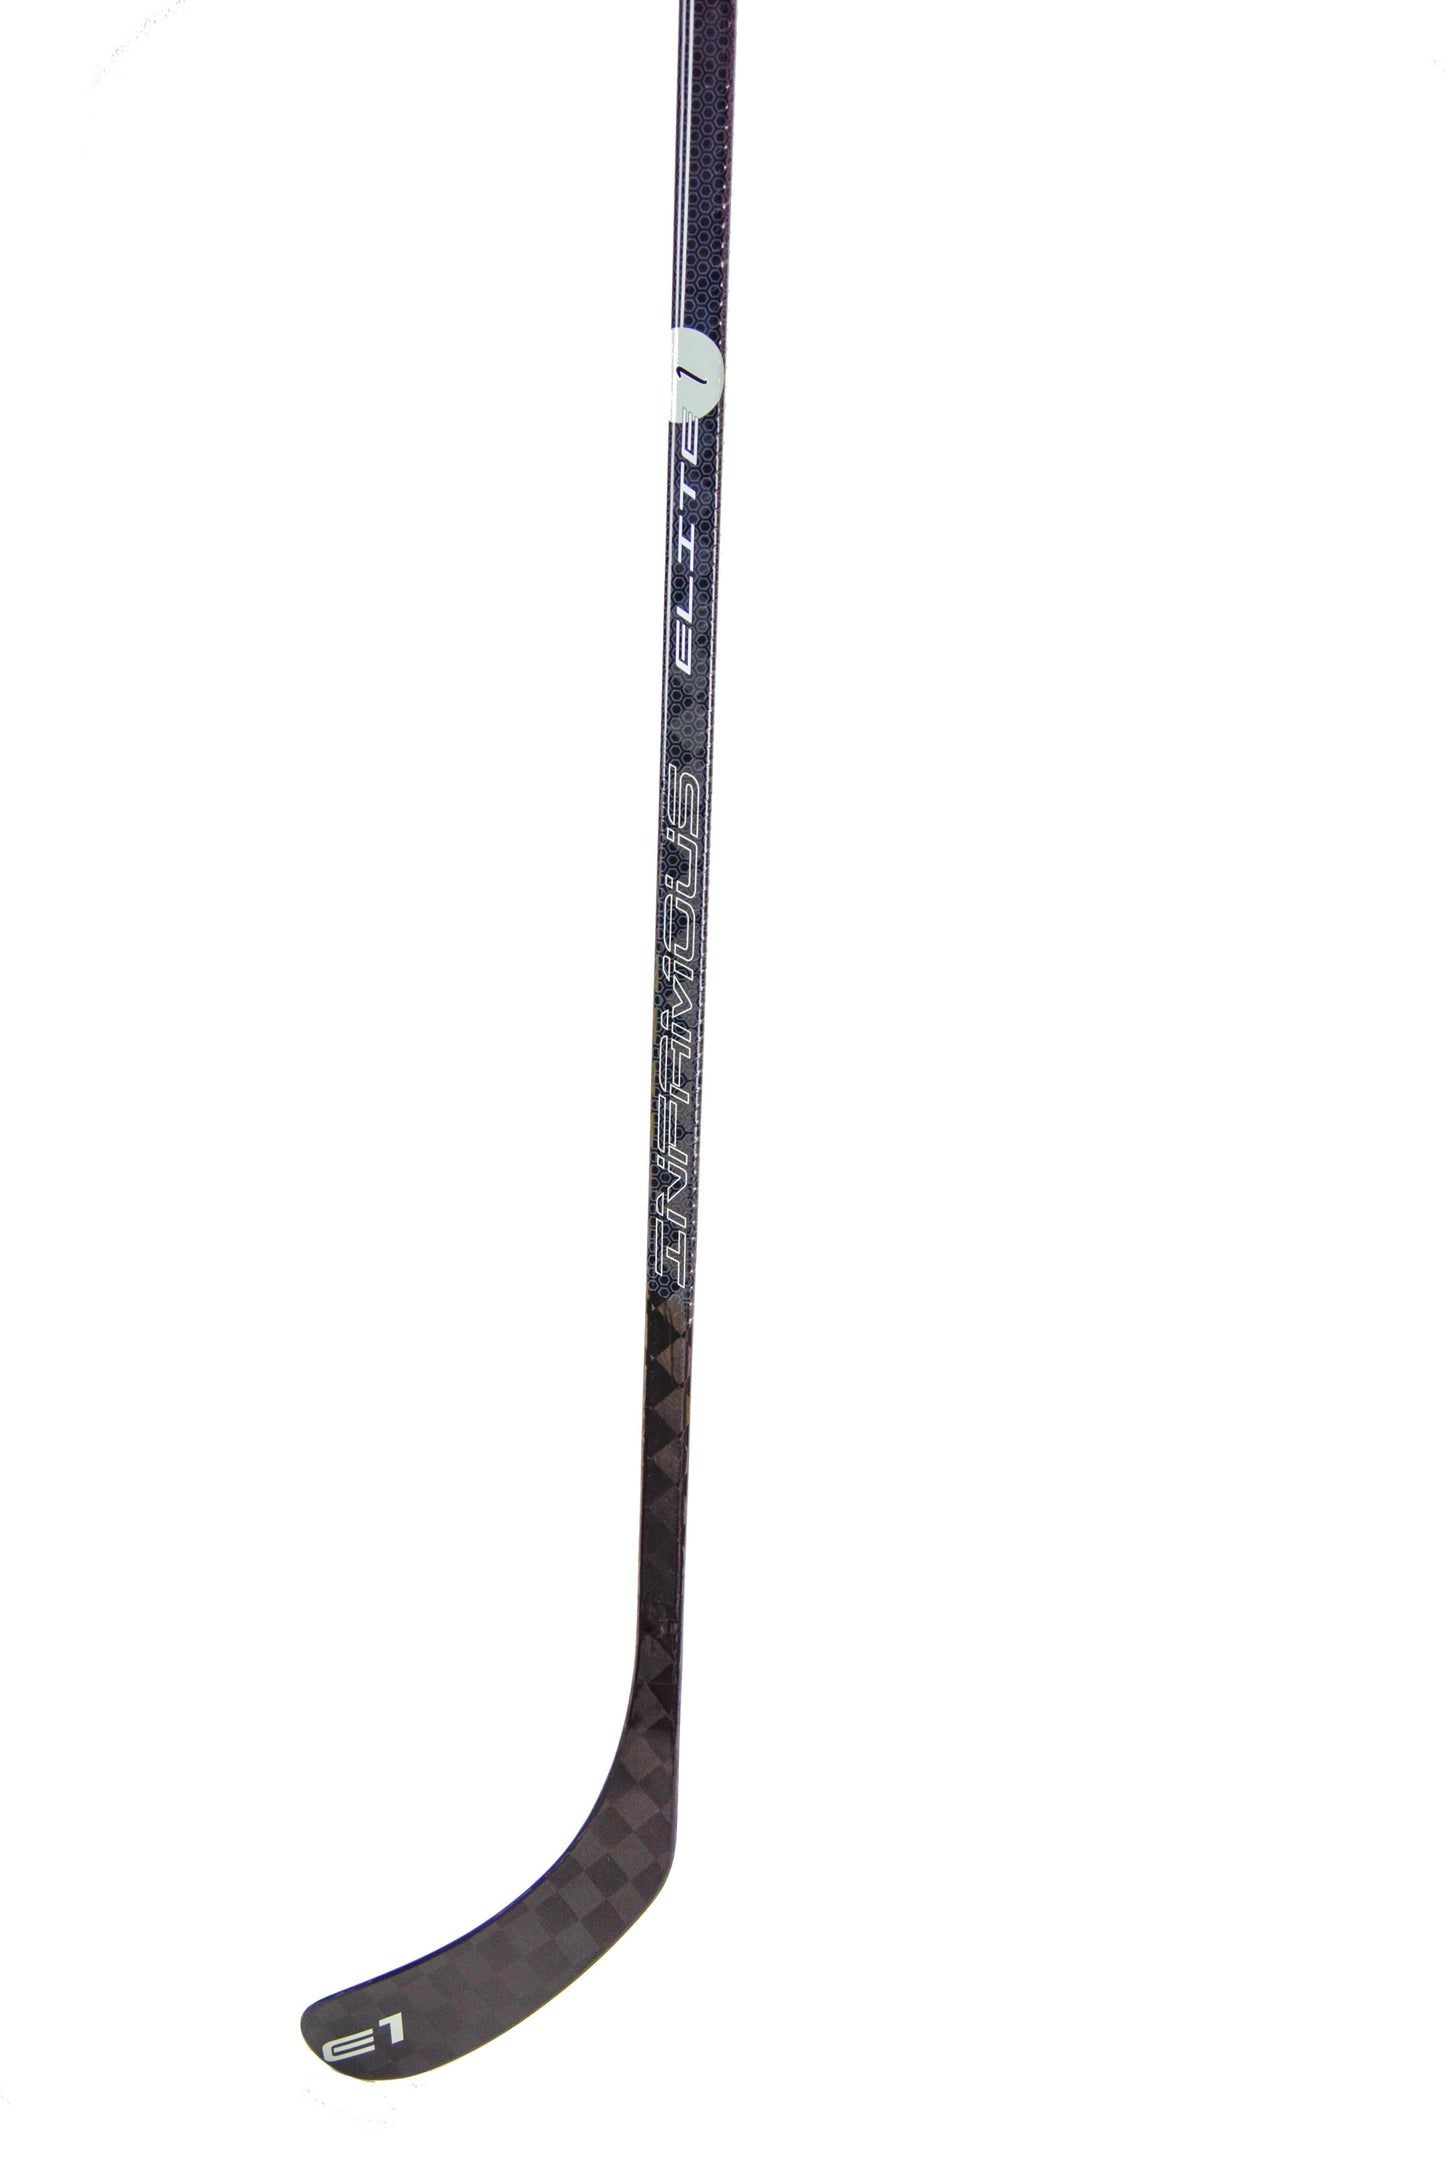 ELITE 1 20 FLEX BLACK-OUT SPECIAL EDITION YOUTH HOCKEY STICK - Infamous Hockey